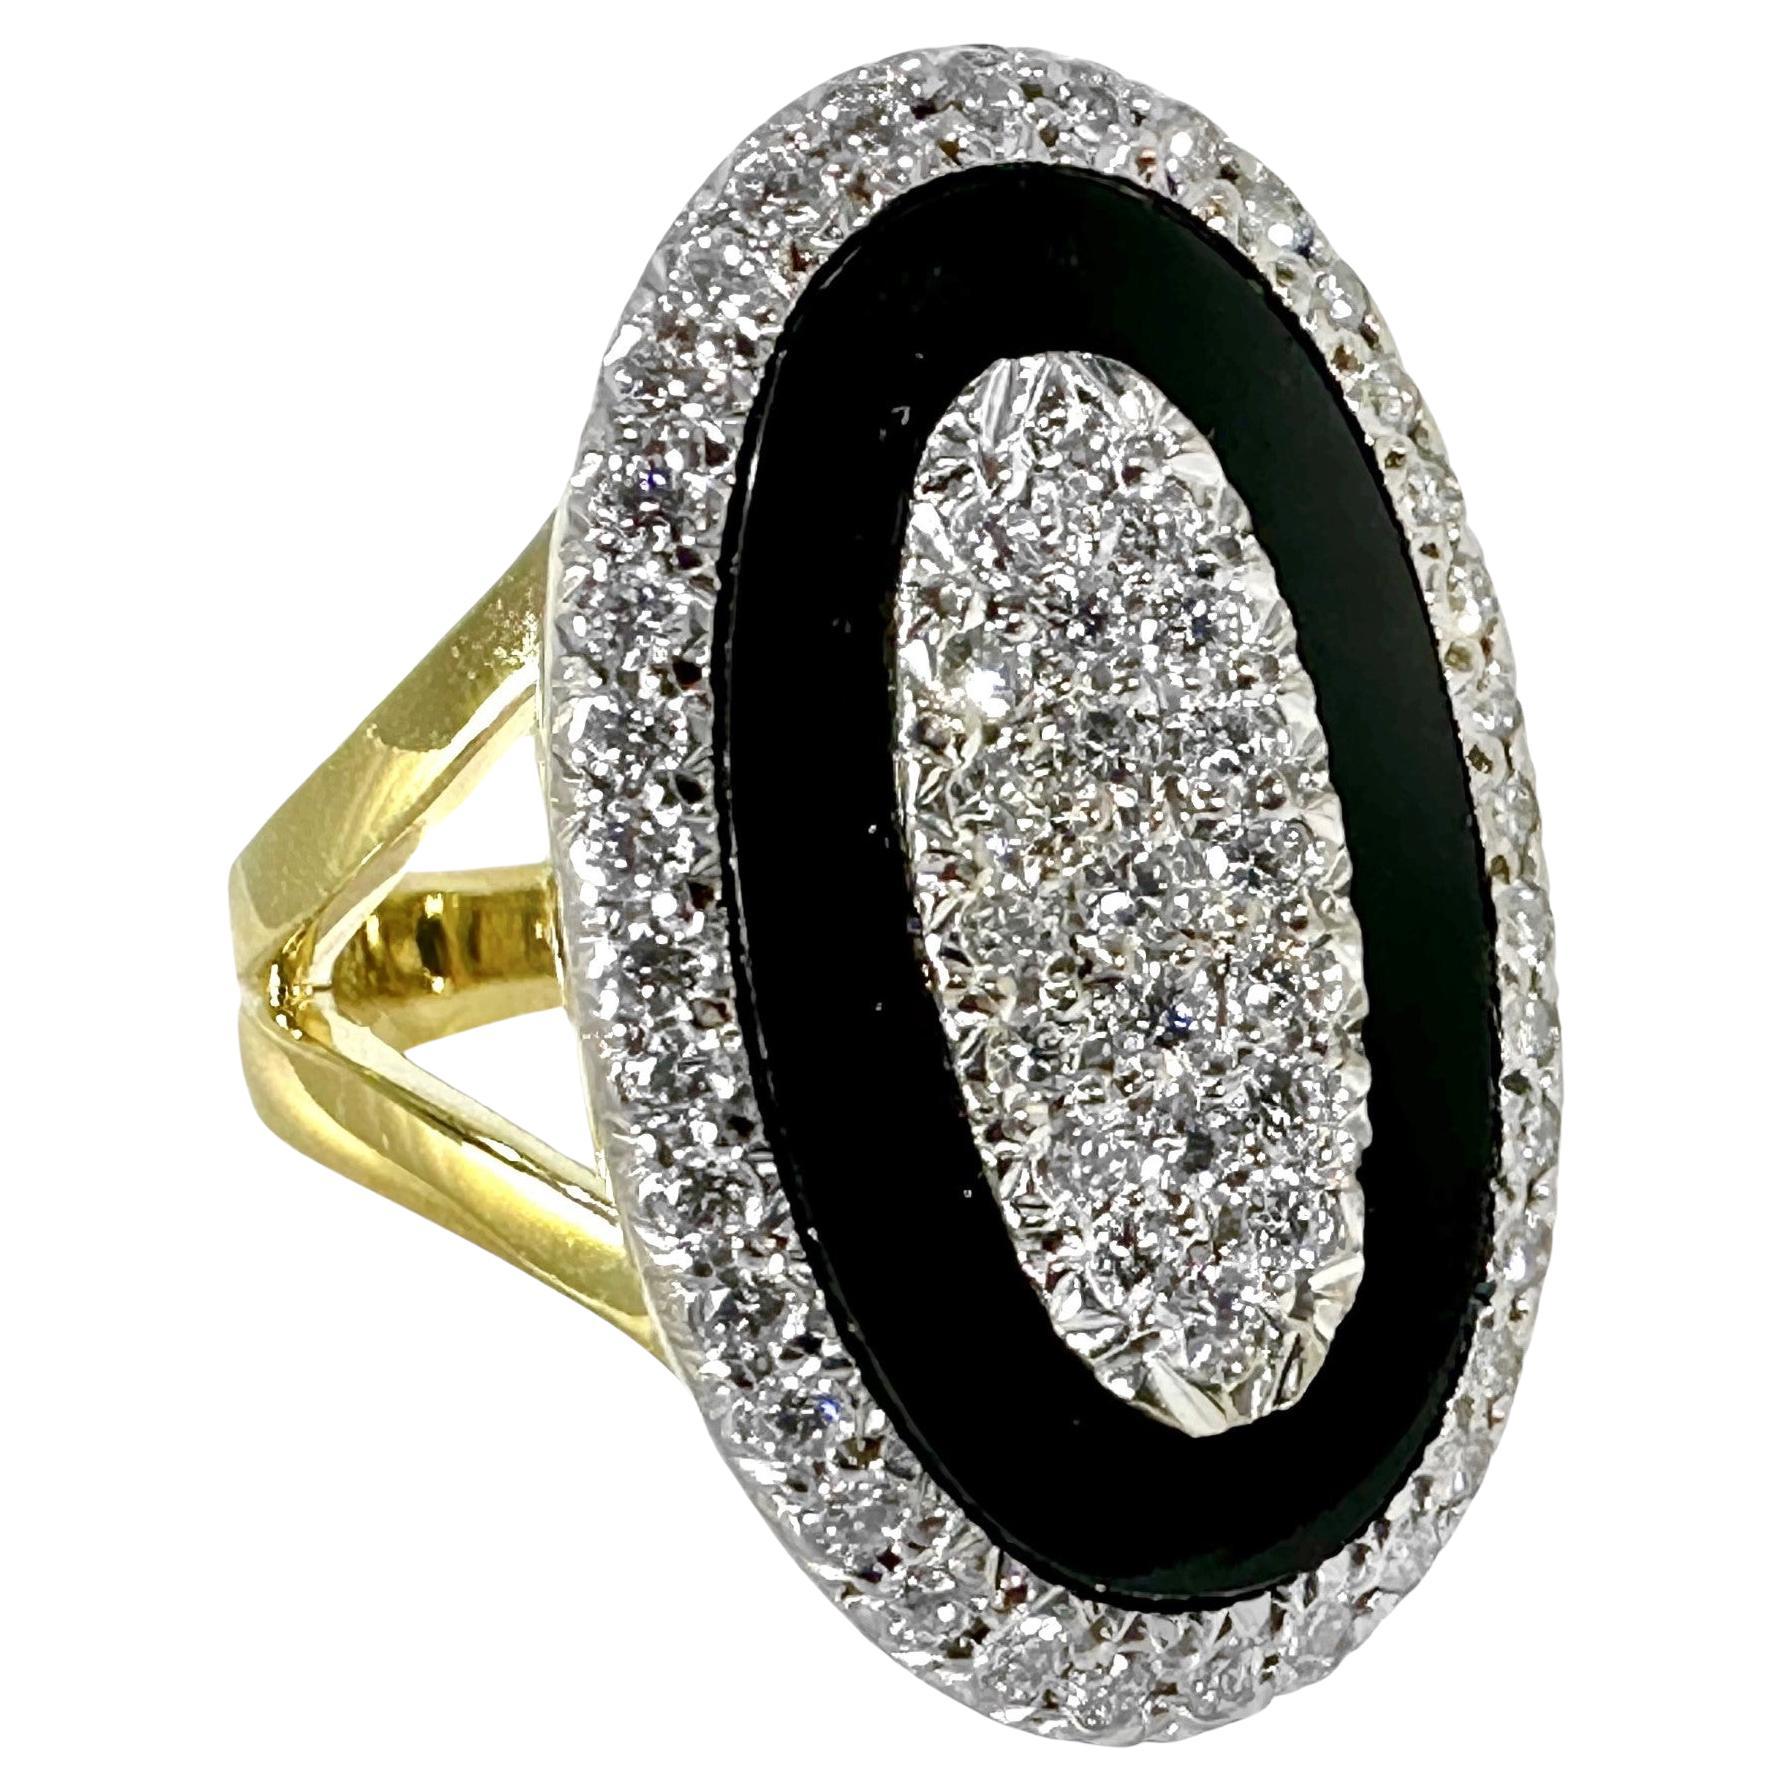 Onyx, Diamond and 18K Gold, Oval Shaped Ring 1 Inch Long x 5/8 Inch Wide For Sale